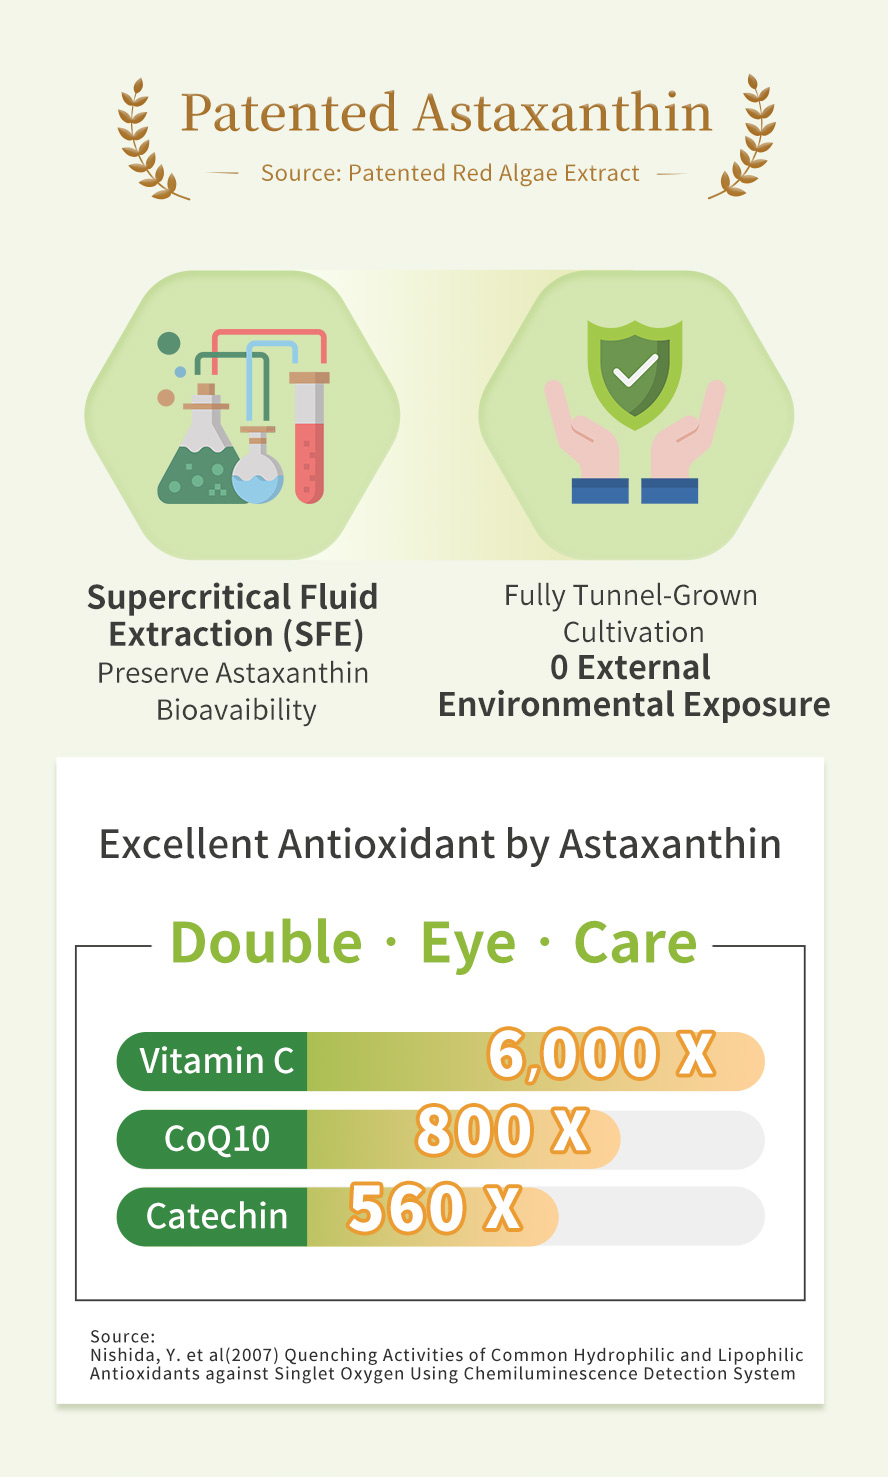 Extra added of astaxanthin can promote great antioxidant effect than vitamin C and Q10 with high bioavailability